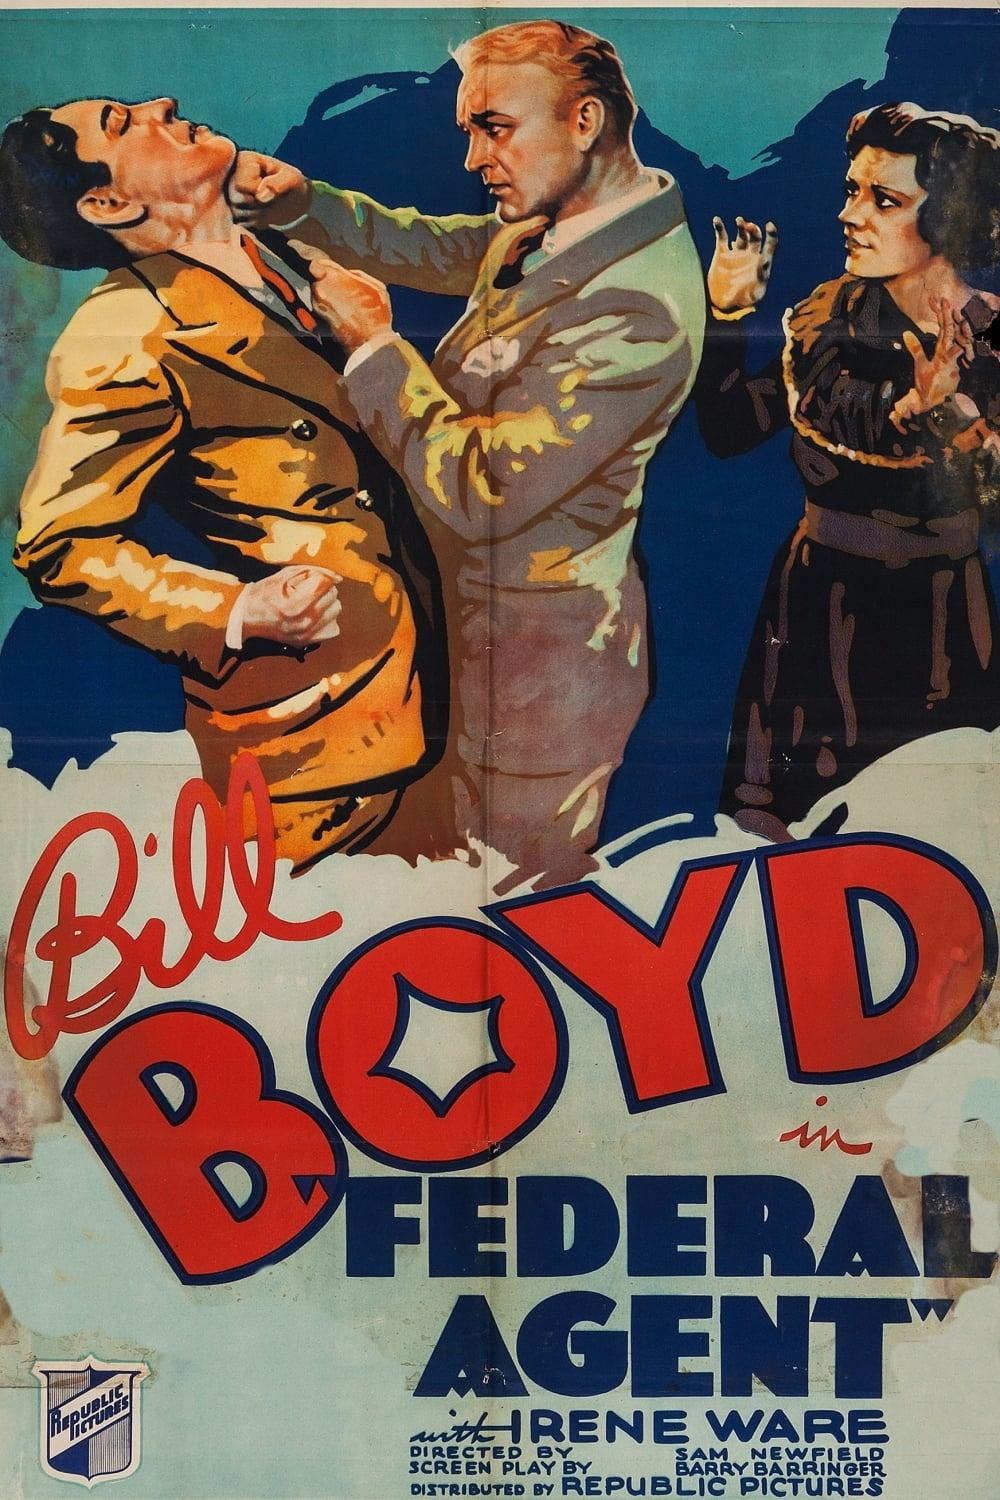 Federal Agent poster